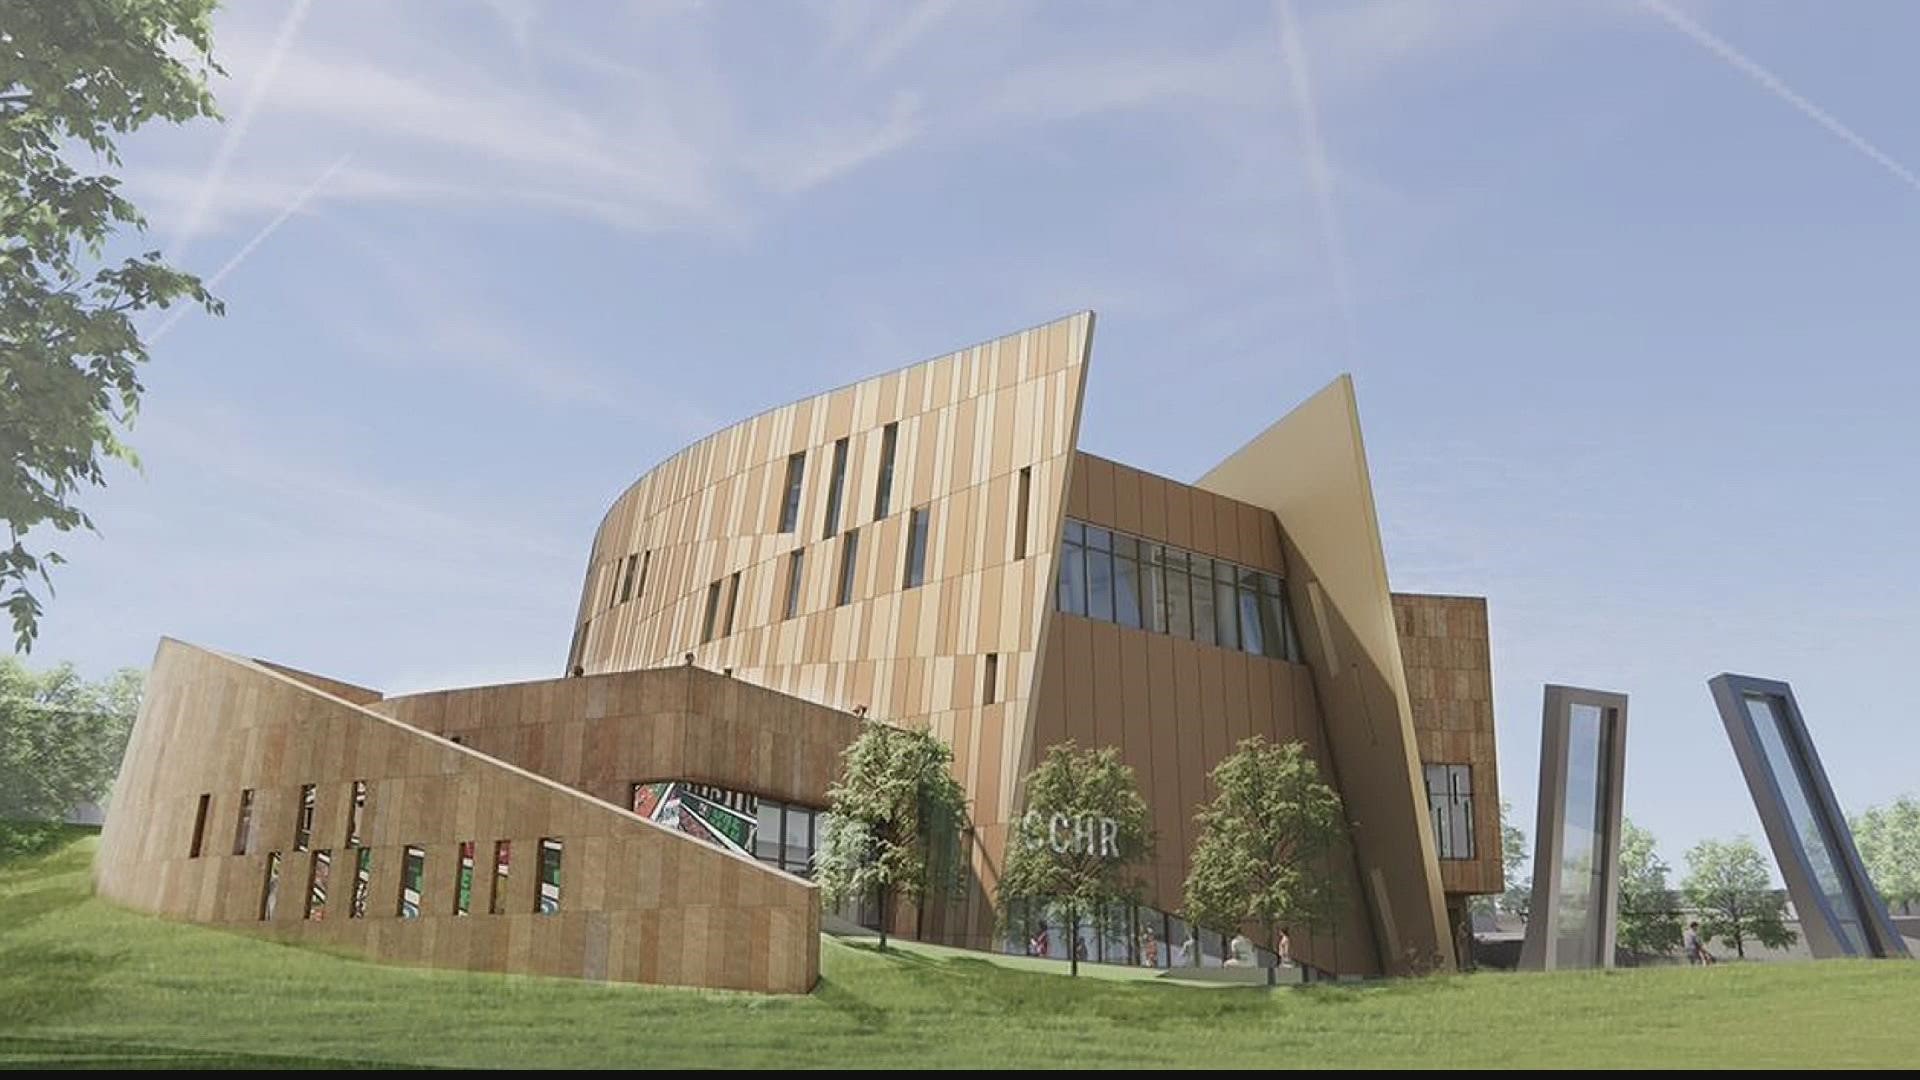 The Center will break ground Oct. 14 on the project that will add two new wings